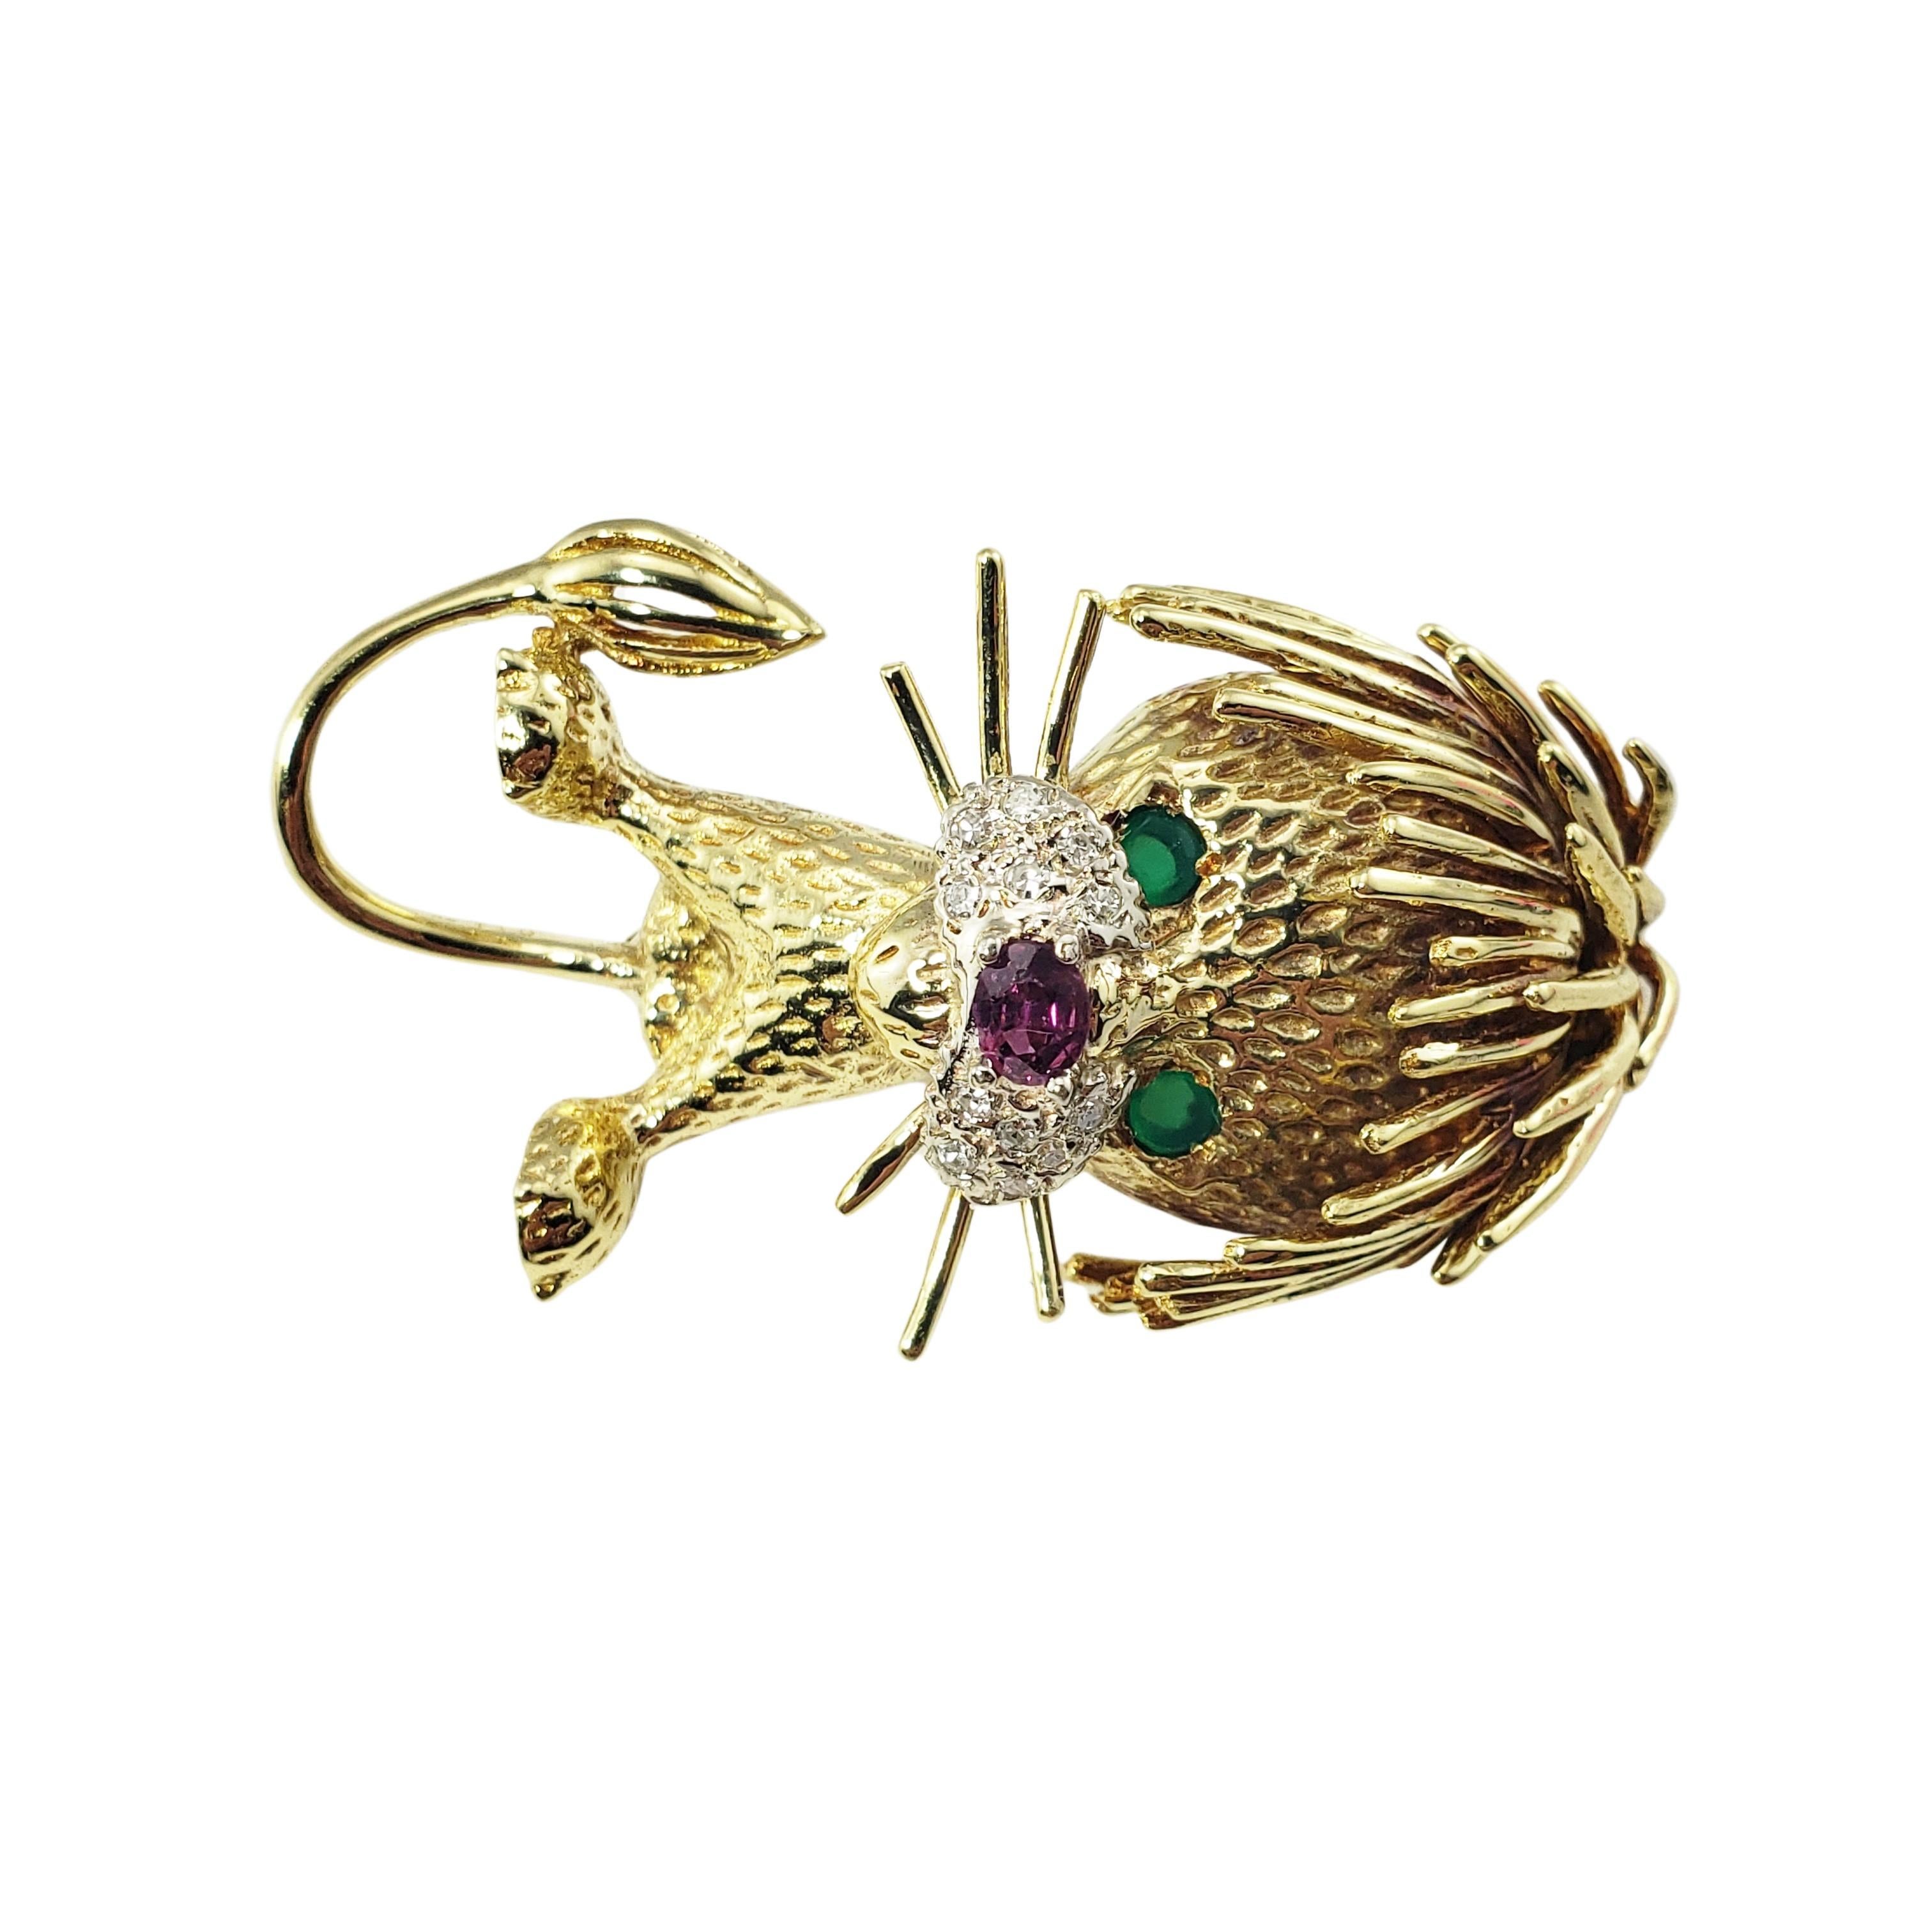 18 Karat Yellow Gold and Gemstone Lion Brooch/Pendant-

This stunning lion brooch is accented with two emeralds (eyes), one rhodolite (nose), and 12 round single cut diamonds set in beautifully detailed 18K yellow gold.

Approximate total diamond